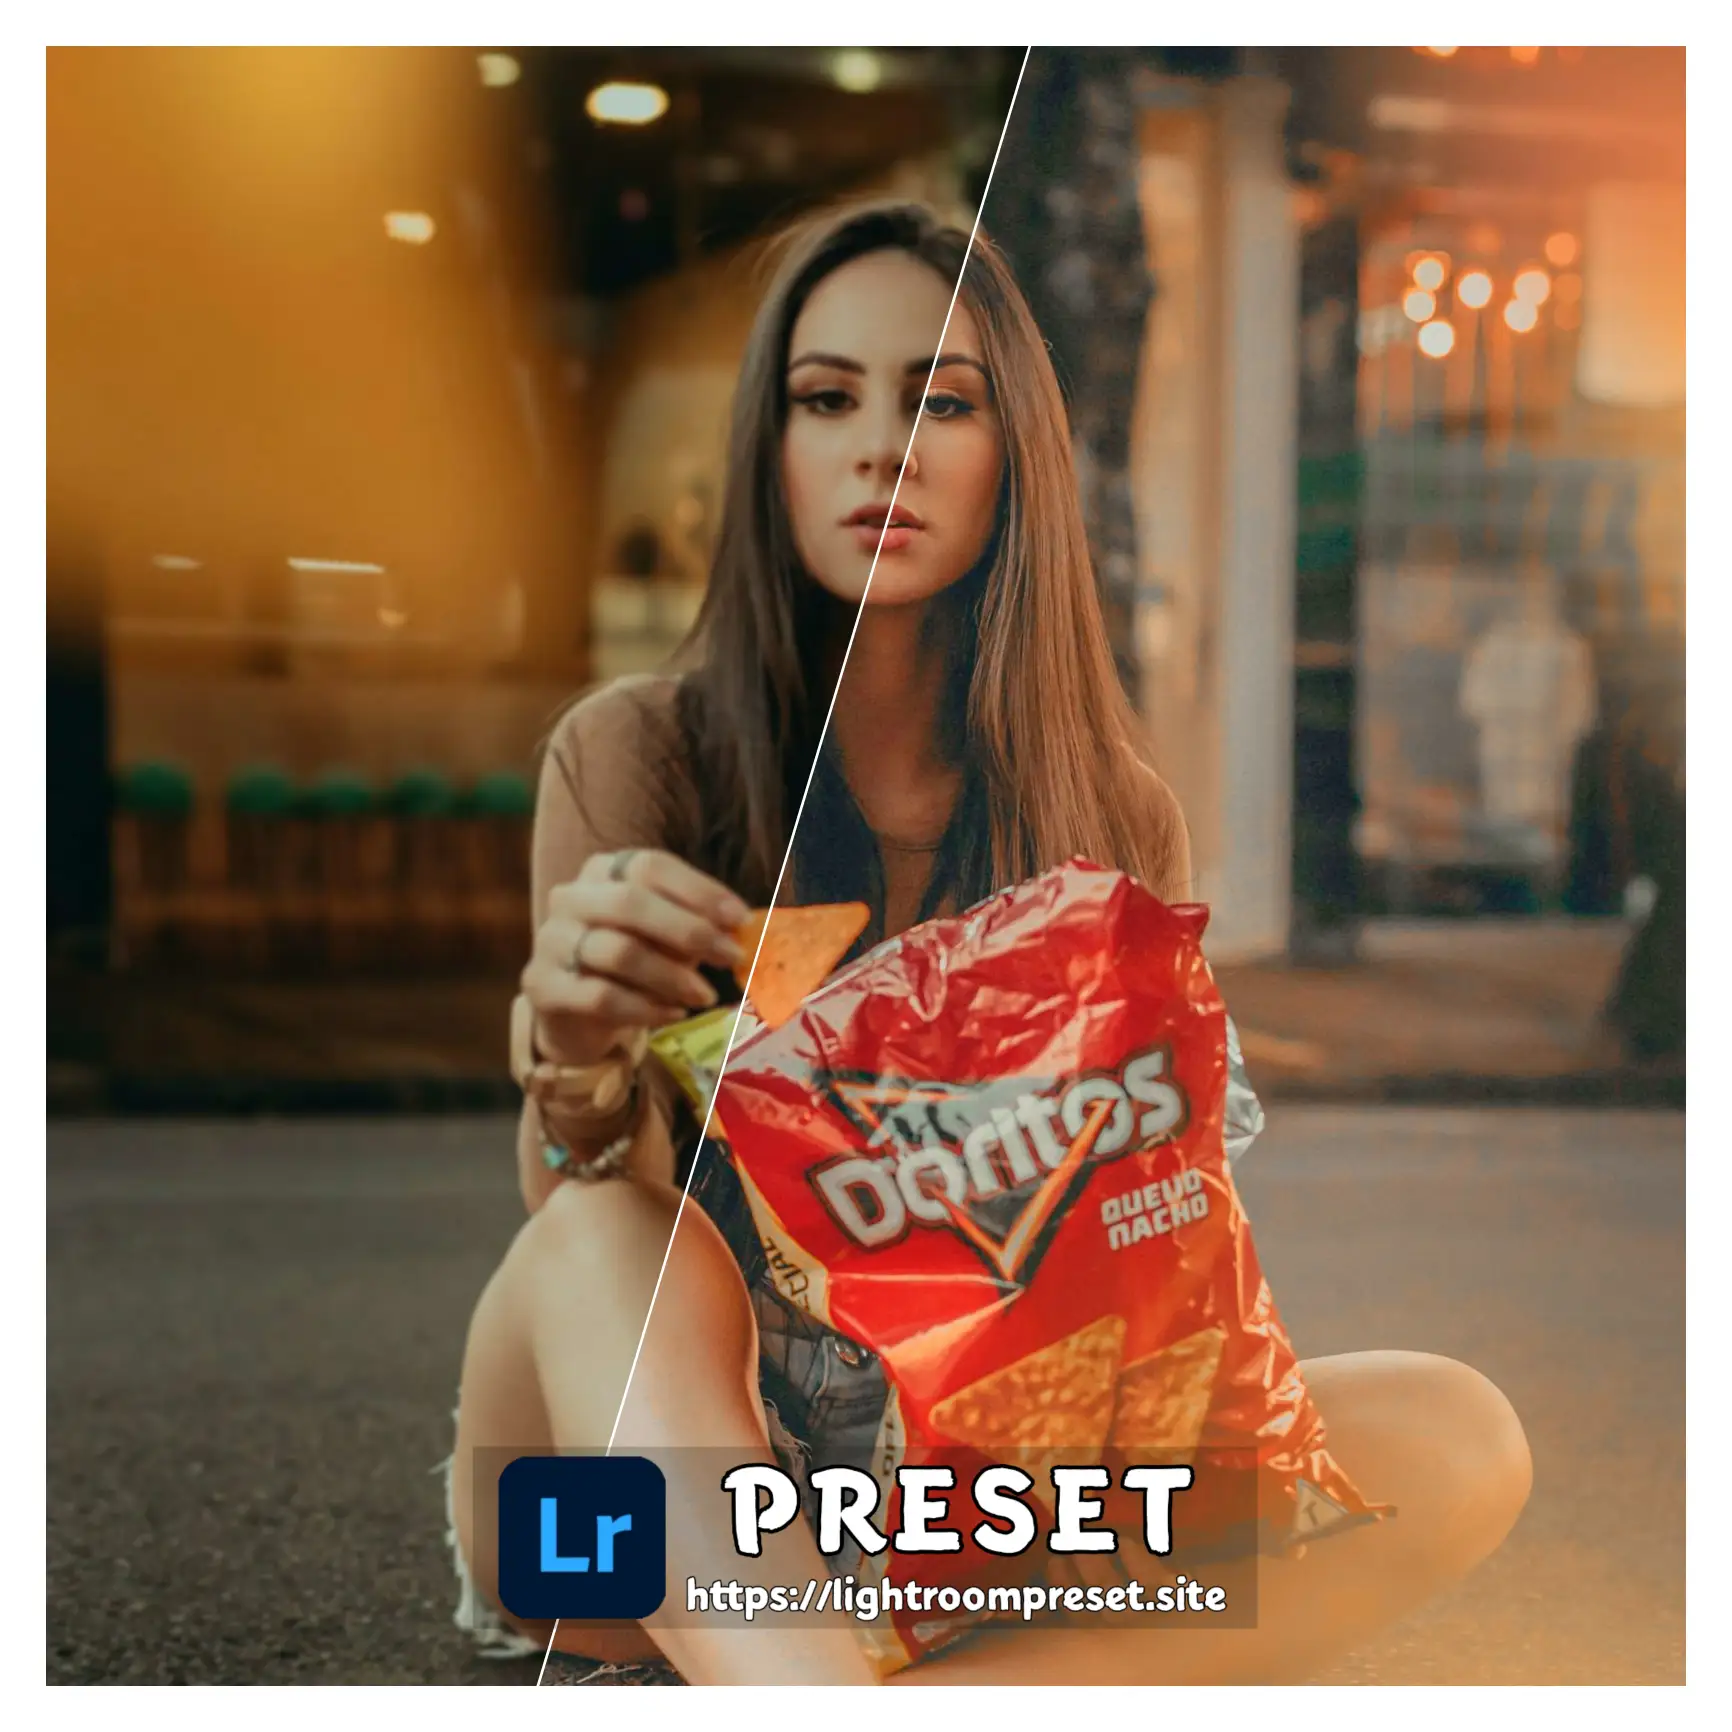 You are currently viewing Lightroom premium presets free download